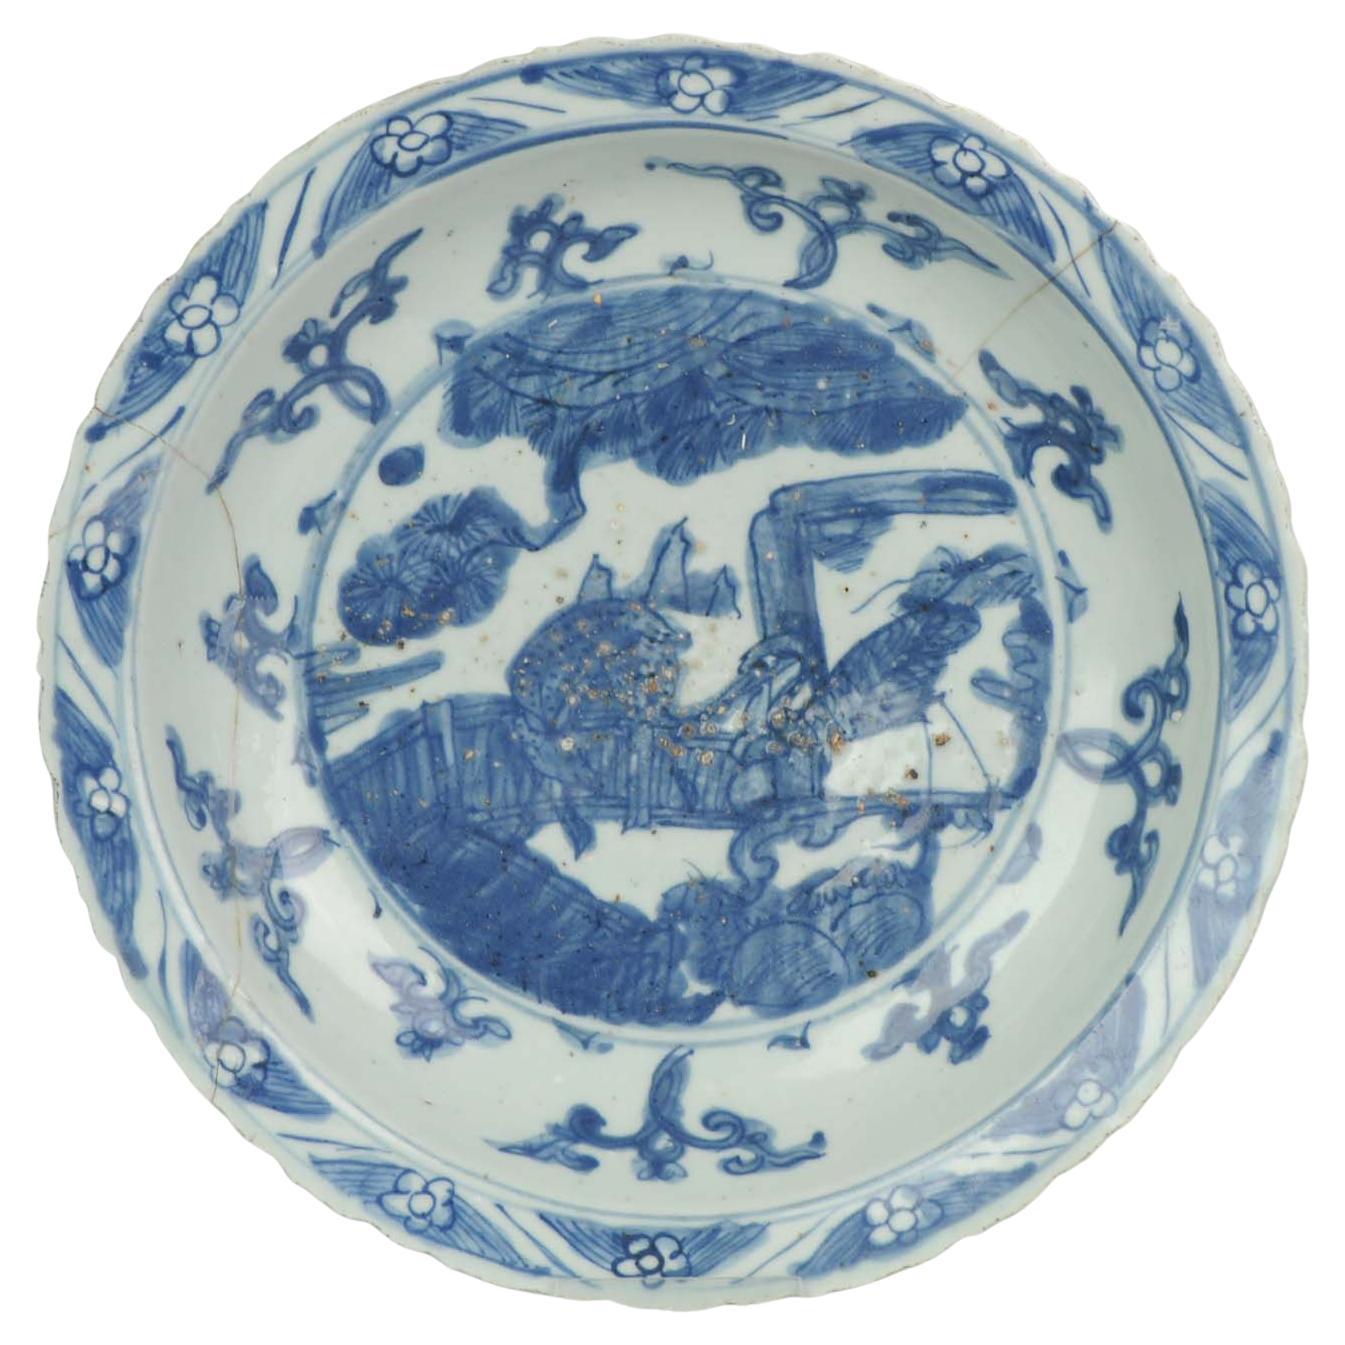 Period Chinese Porcelain Dish Charger Deer and Crane Antique Marked Ming, 16 C